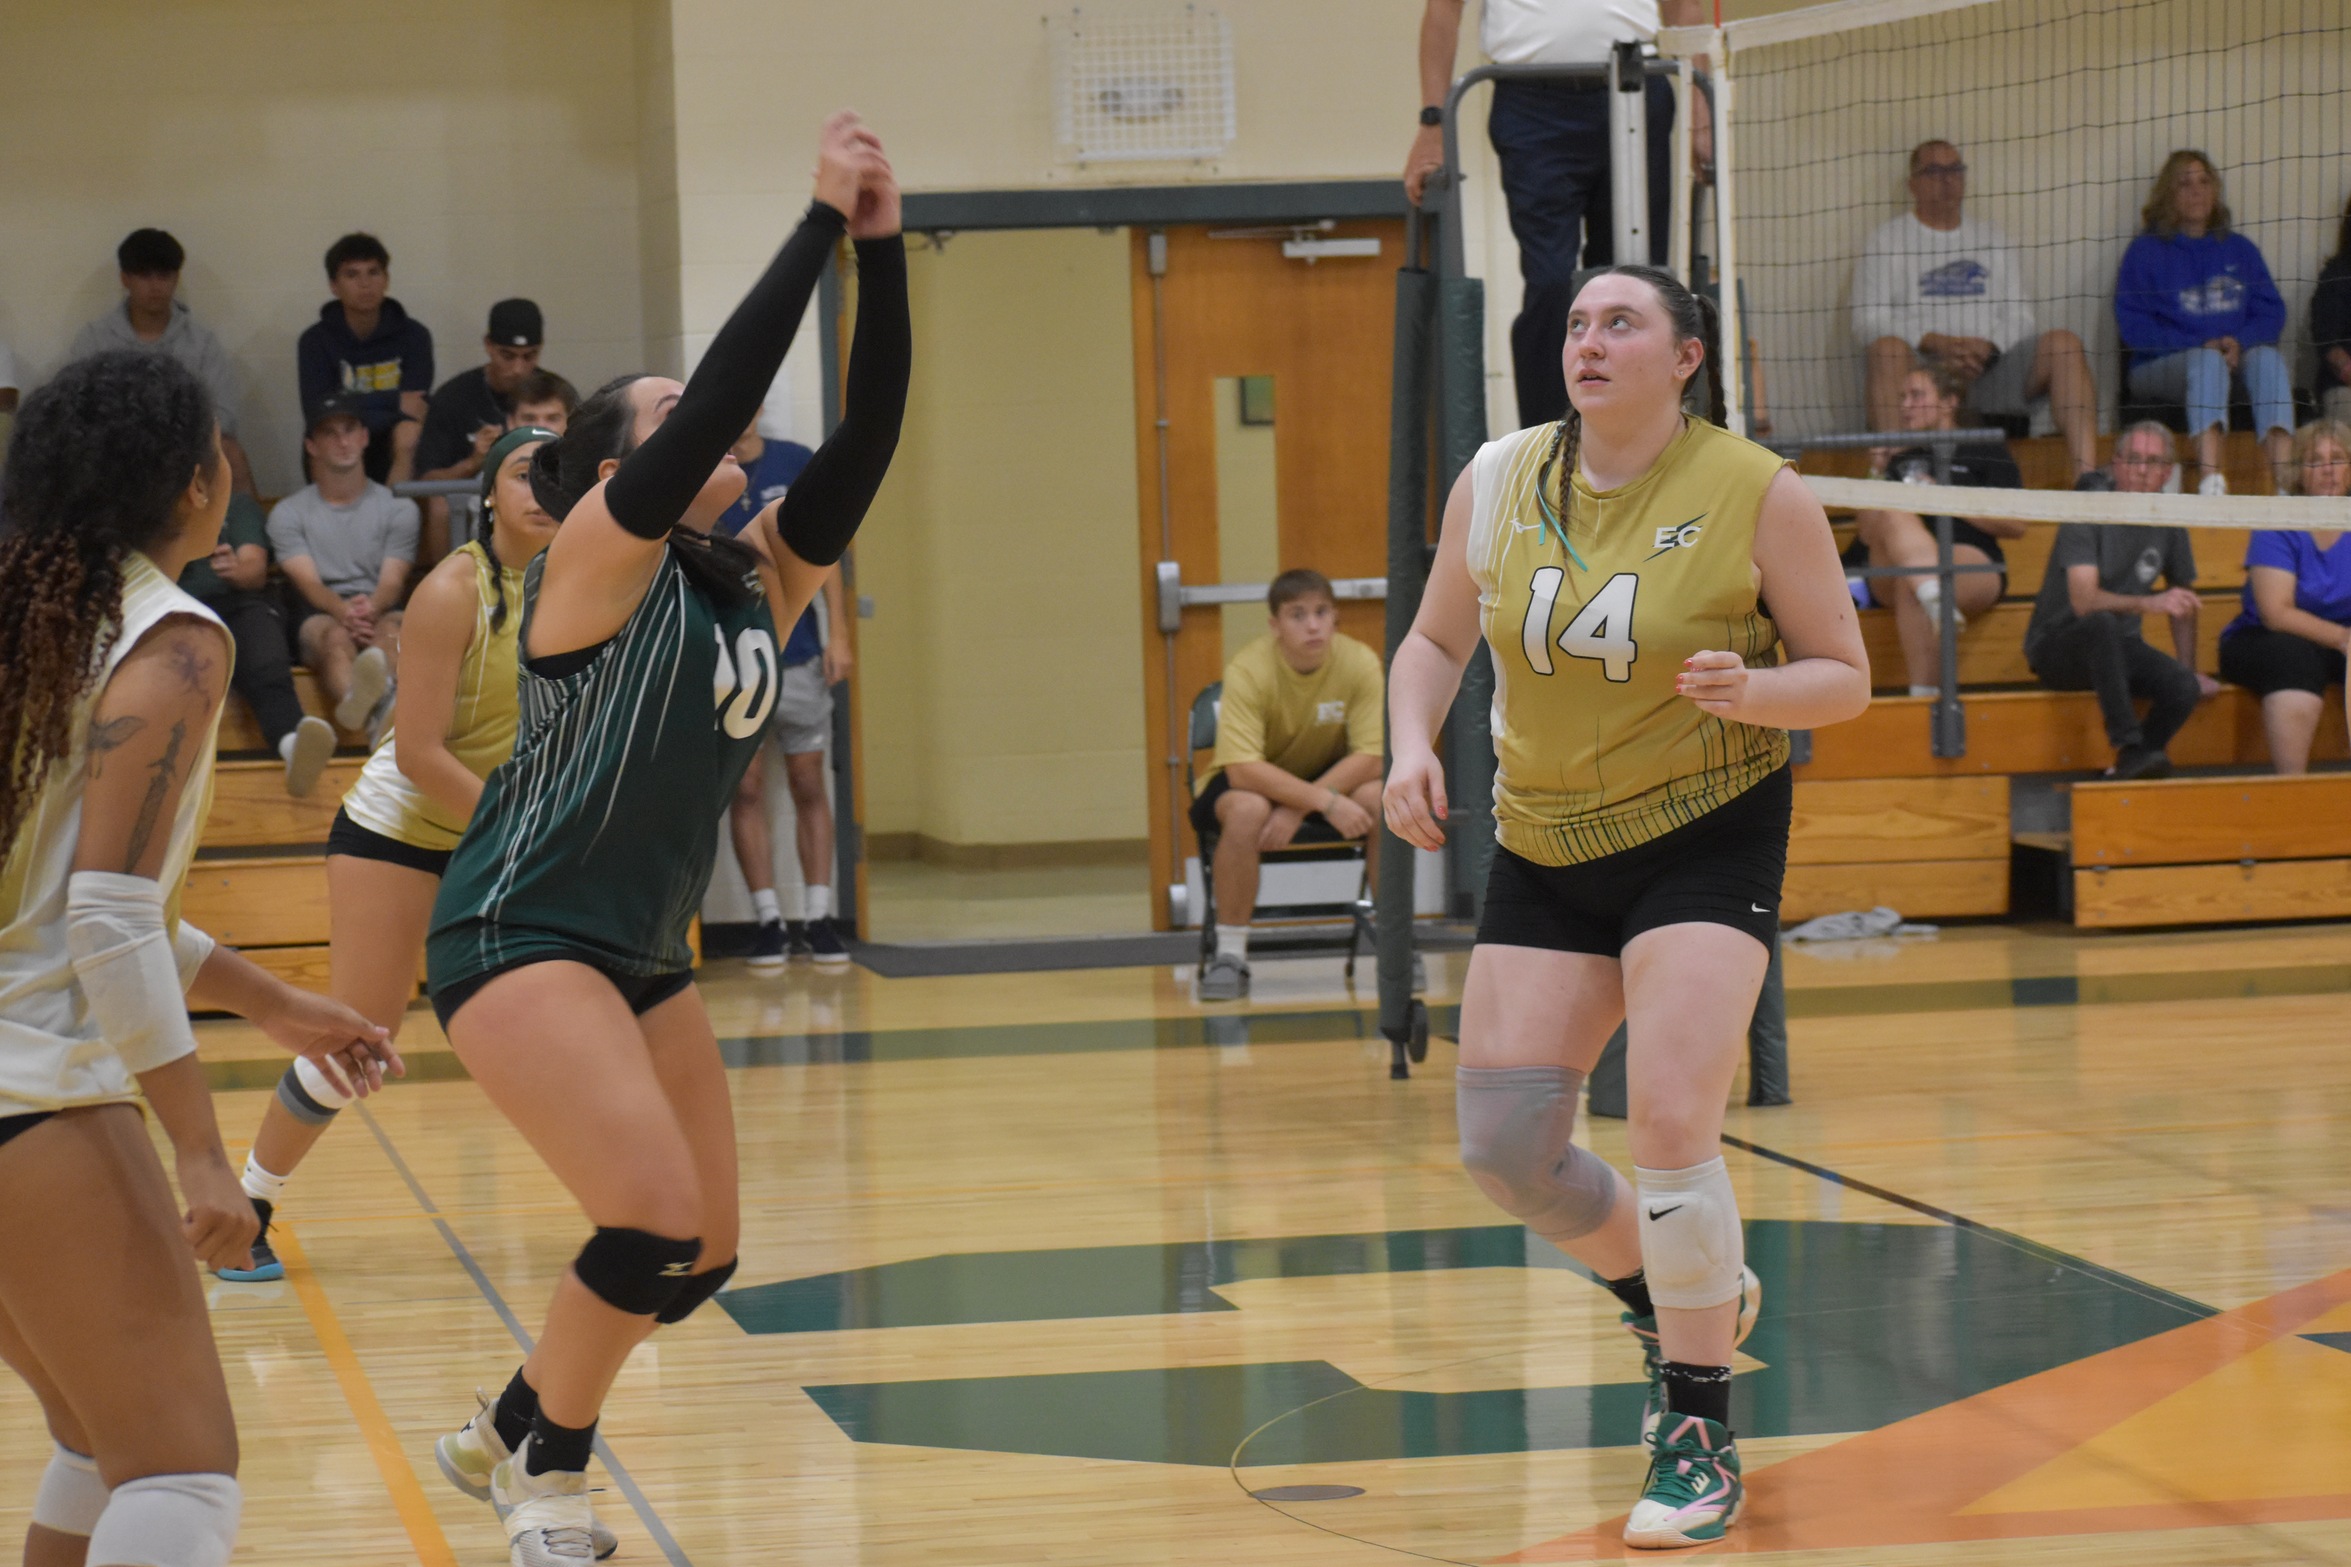 Women's Volleyball Topped in Non-Conference Play by Camels